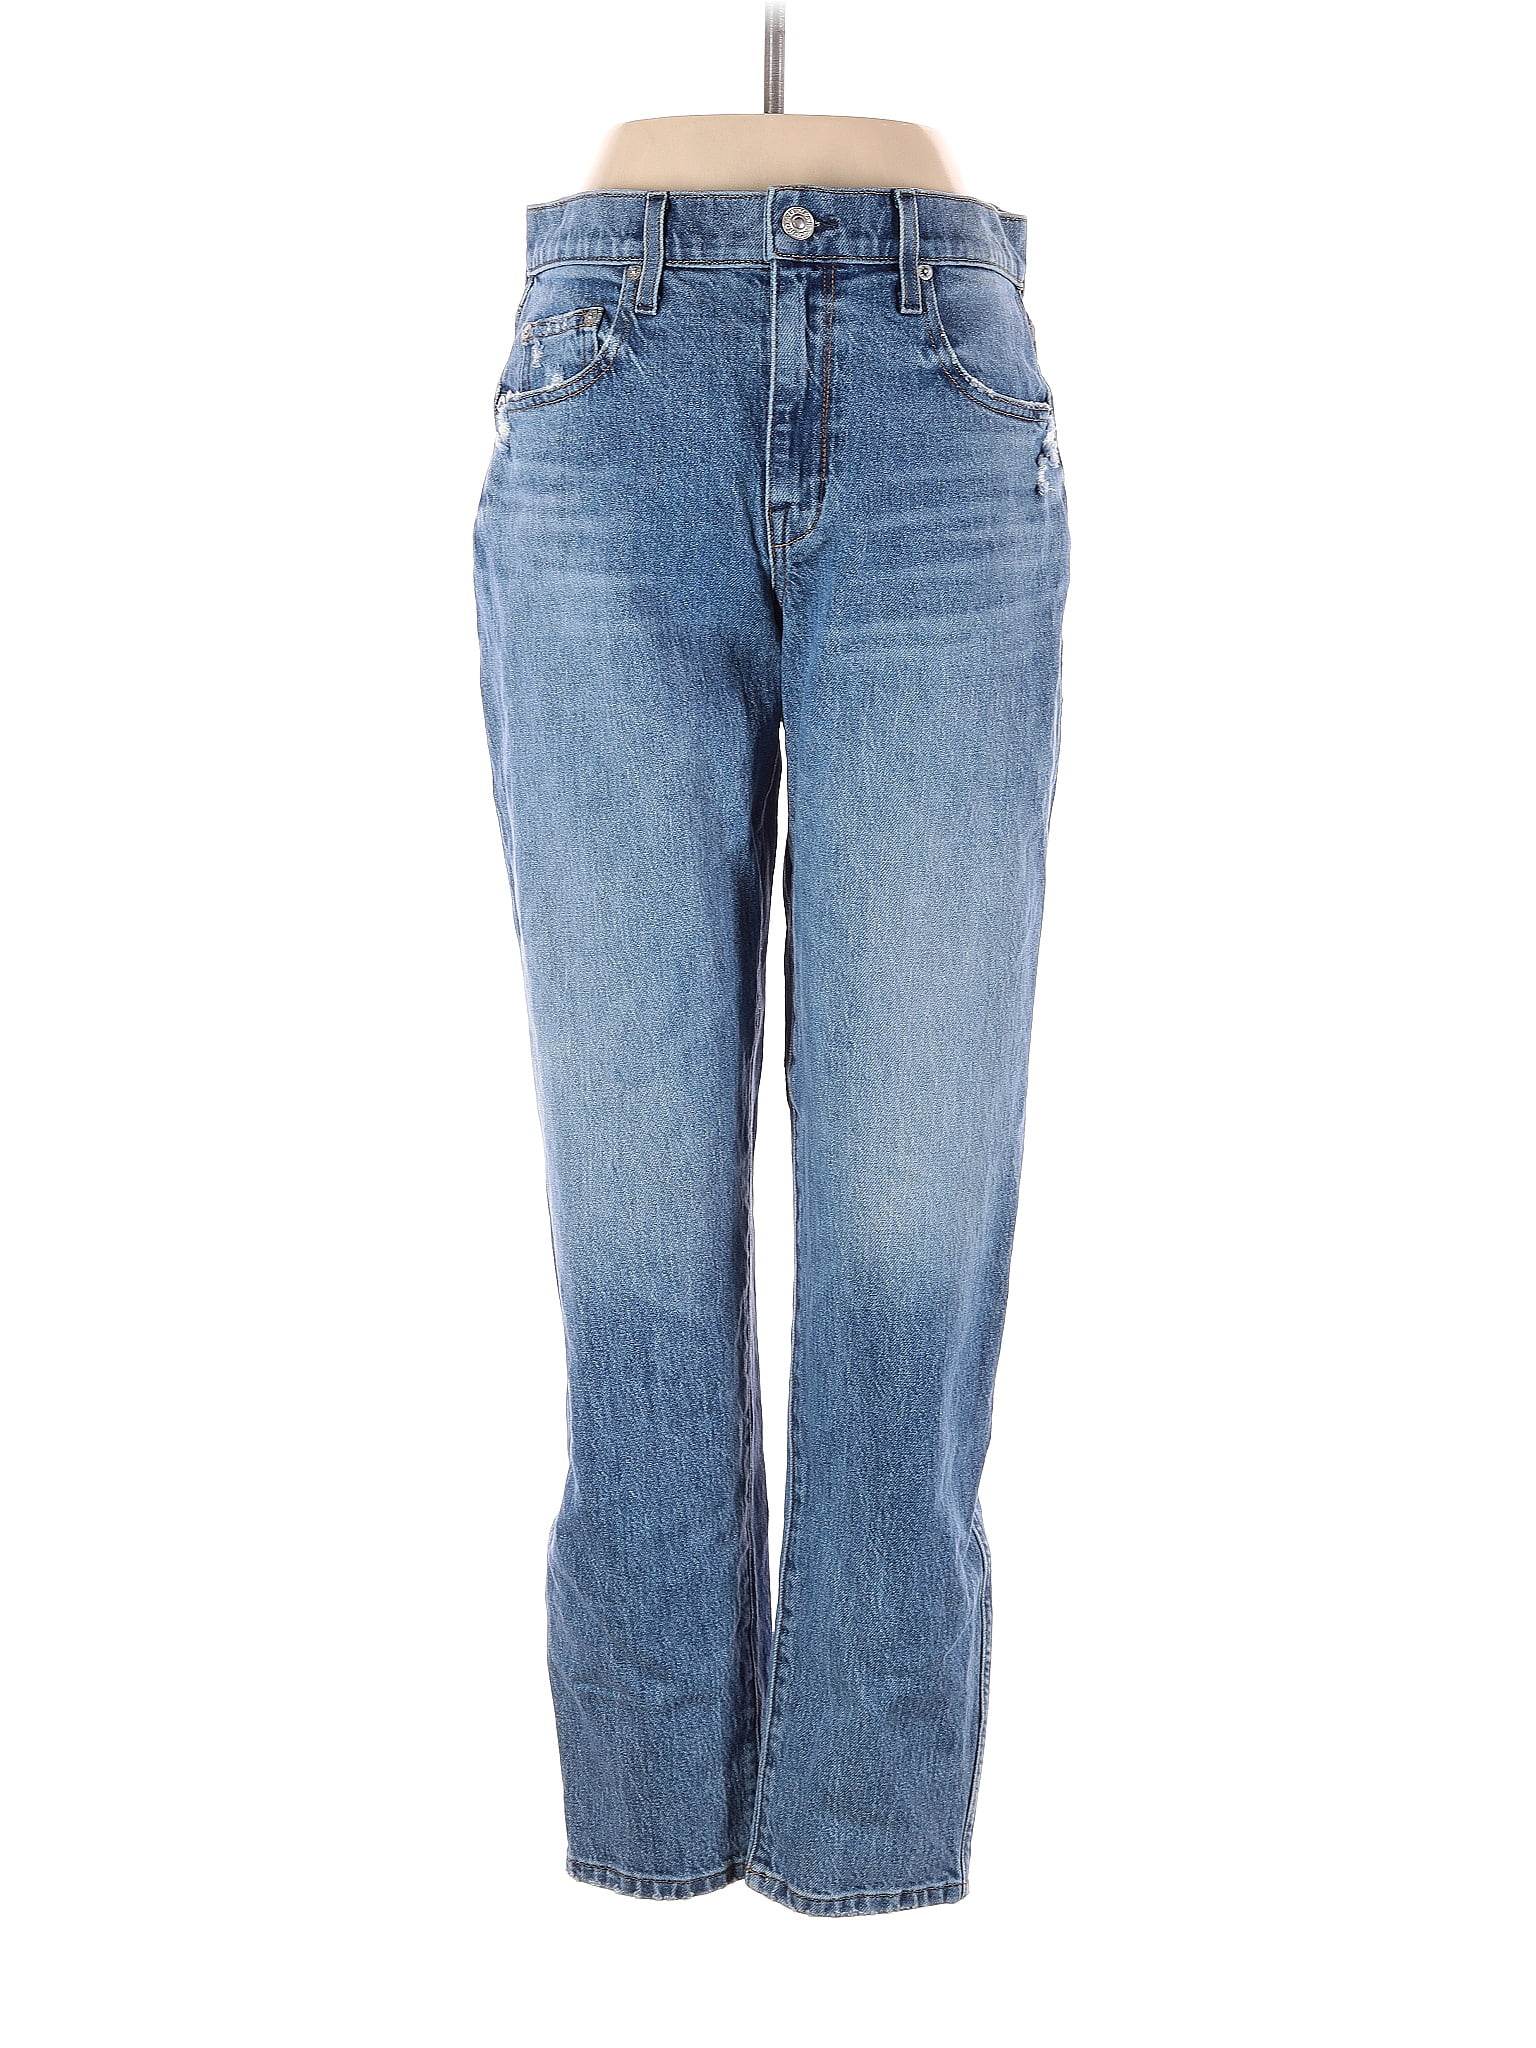 AYR Solid Blue Jeans 27 Waist - 70% off